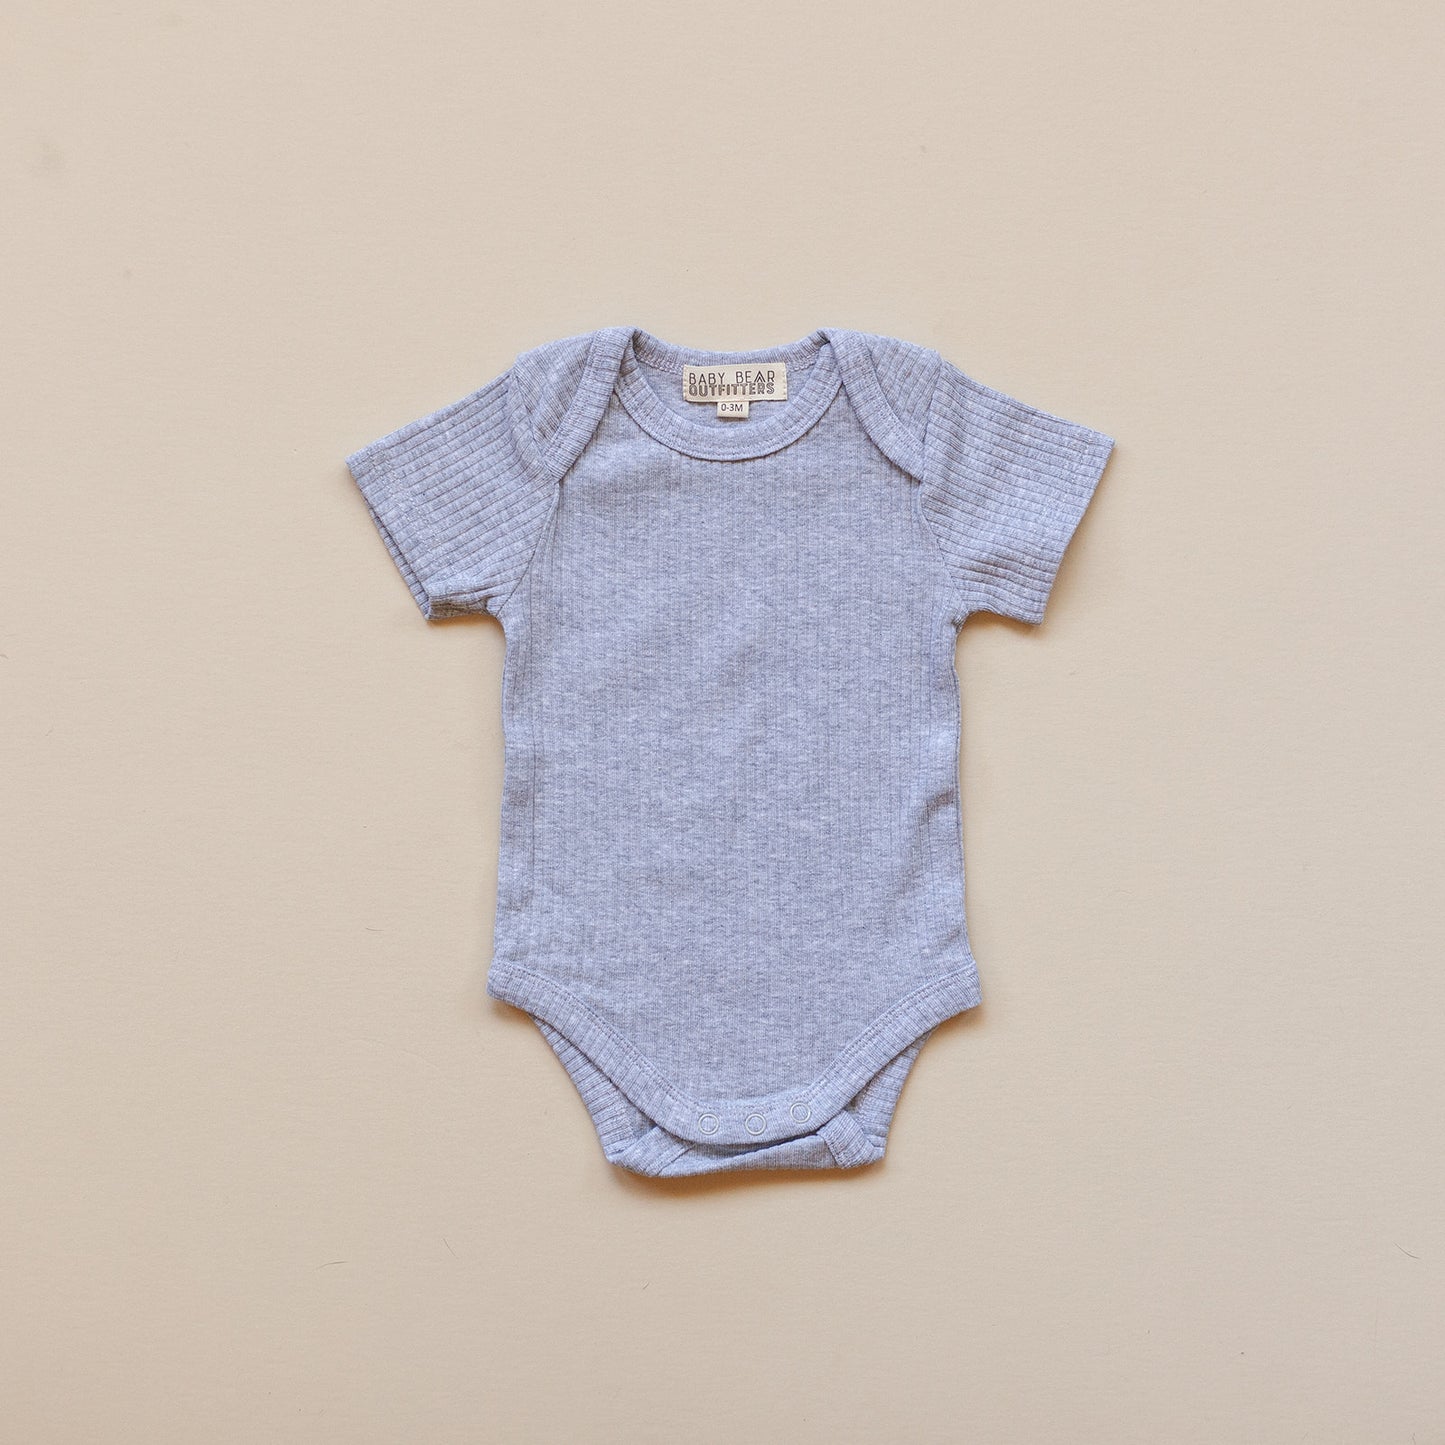 Organic Cotton Envelope Onesie - Baby Bear Outfitters